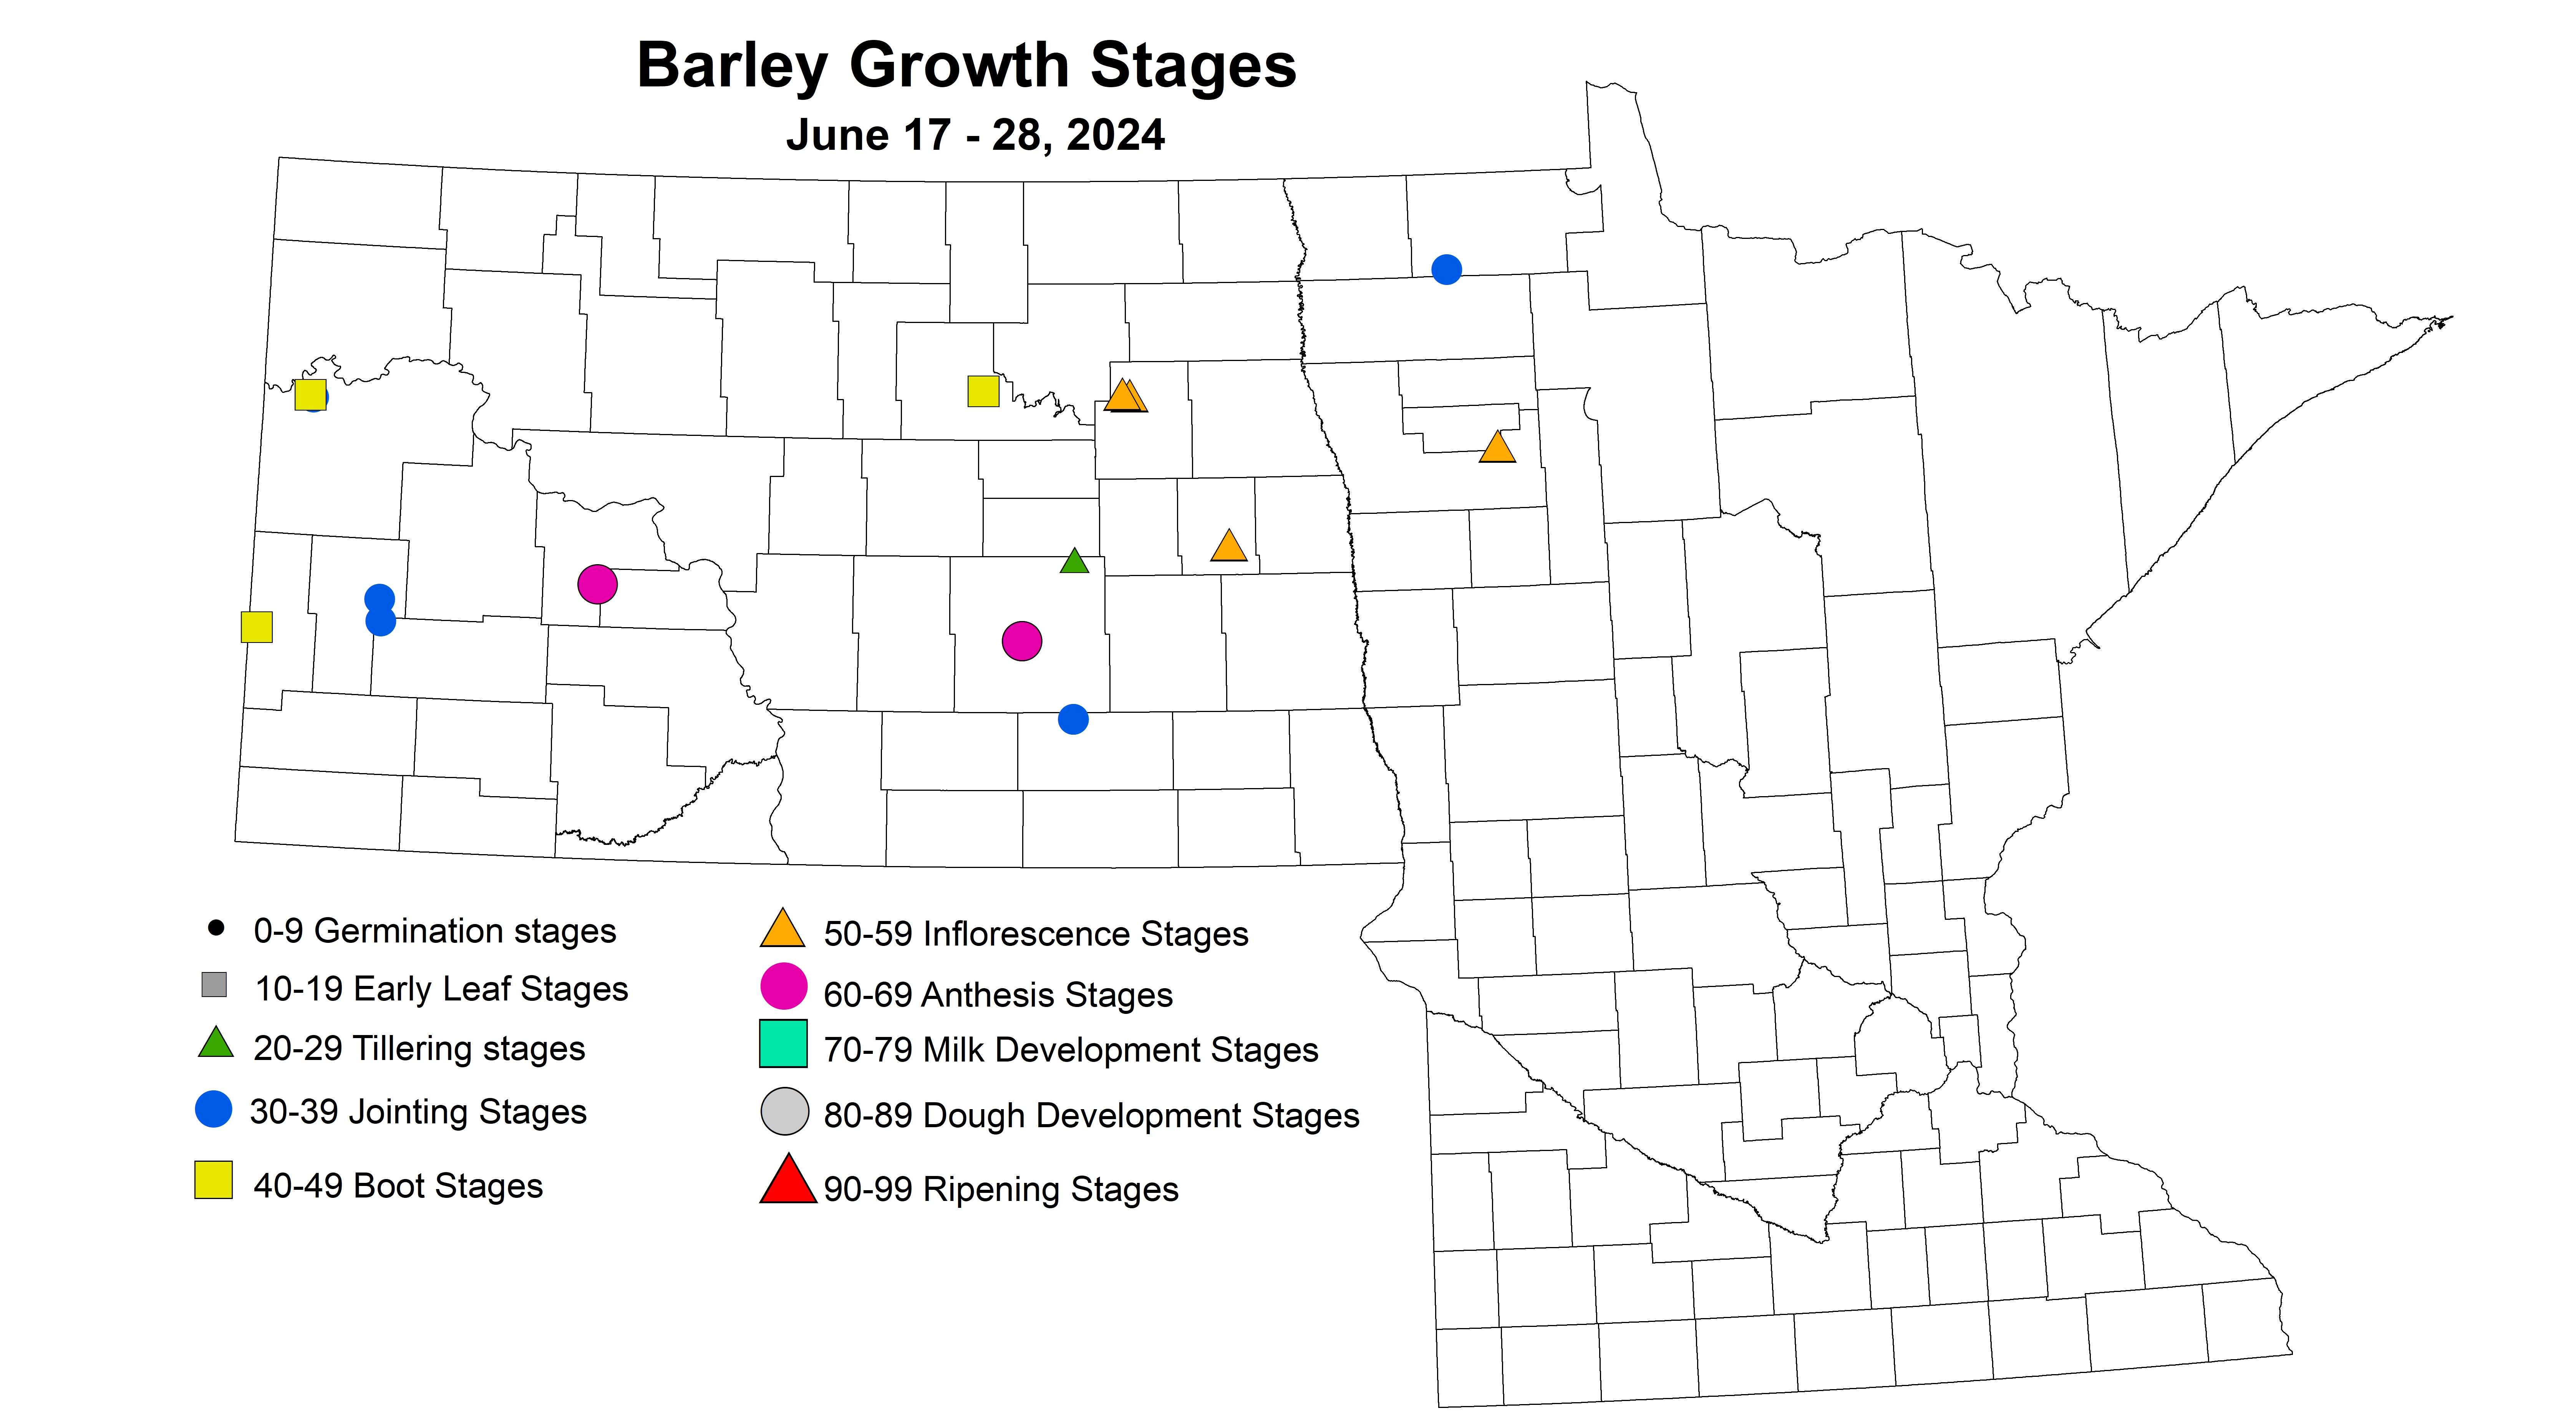 barley growth stages June 17-28 2024